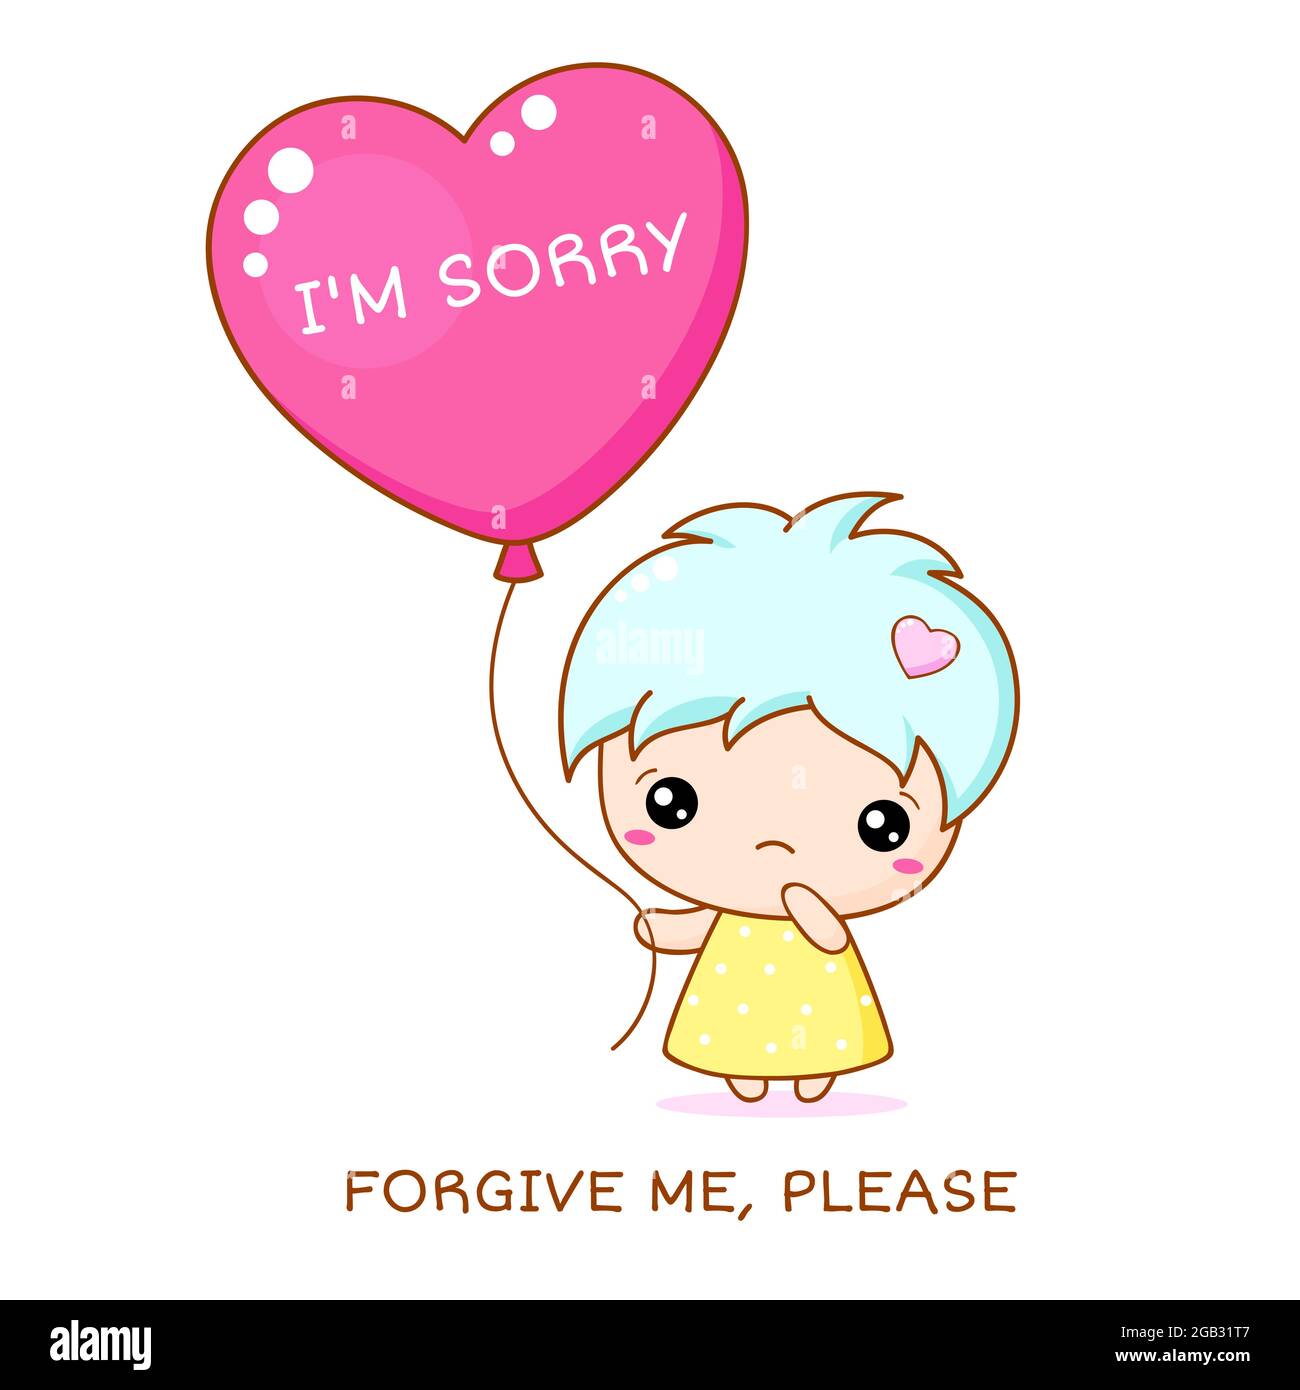 Apologize card. Sadness kawaii little girl with red heart shaped ...